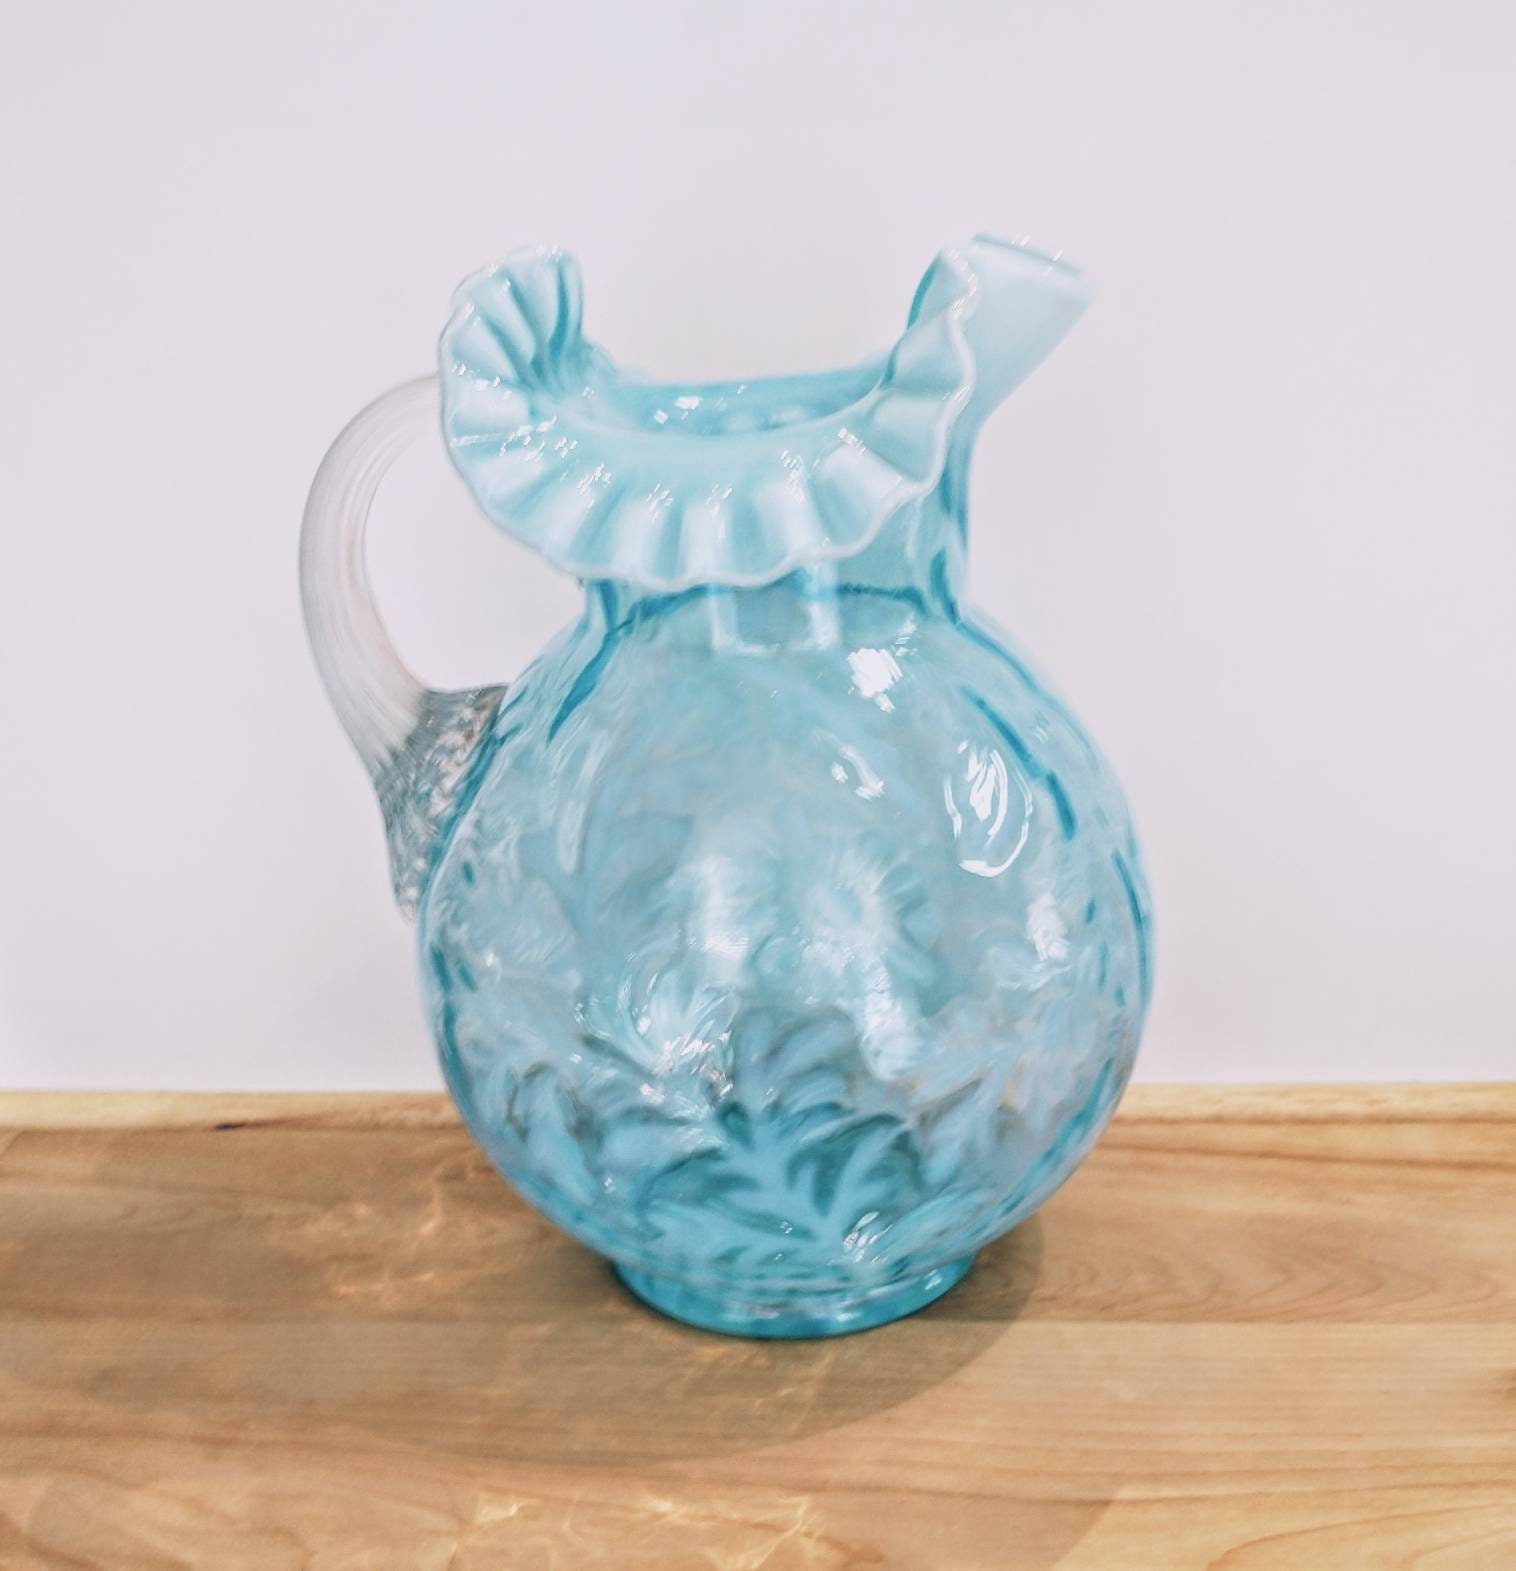 Elegant Clear Glass Pitcher With Crystal-cut Daisy Pattern Beautiful Piece  7287 